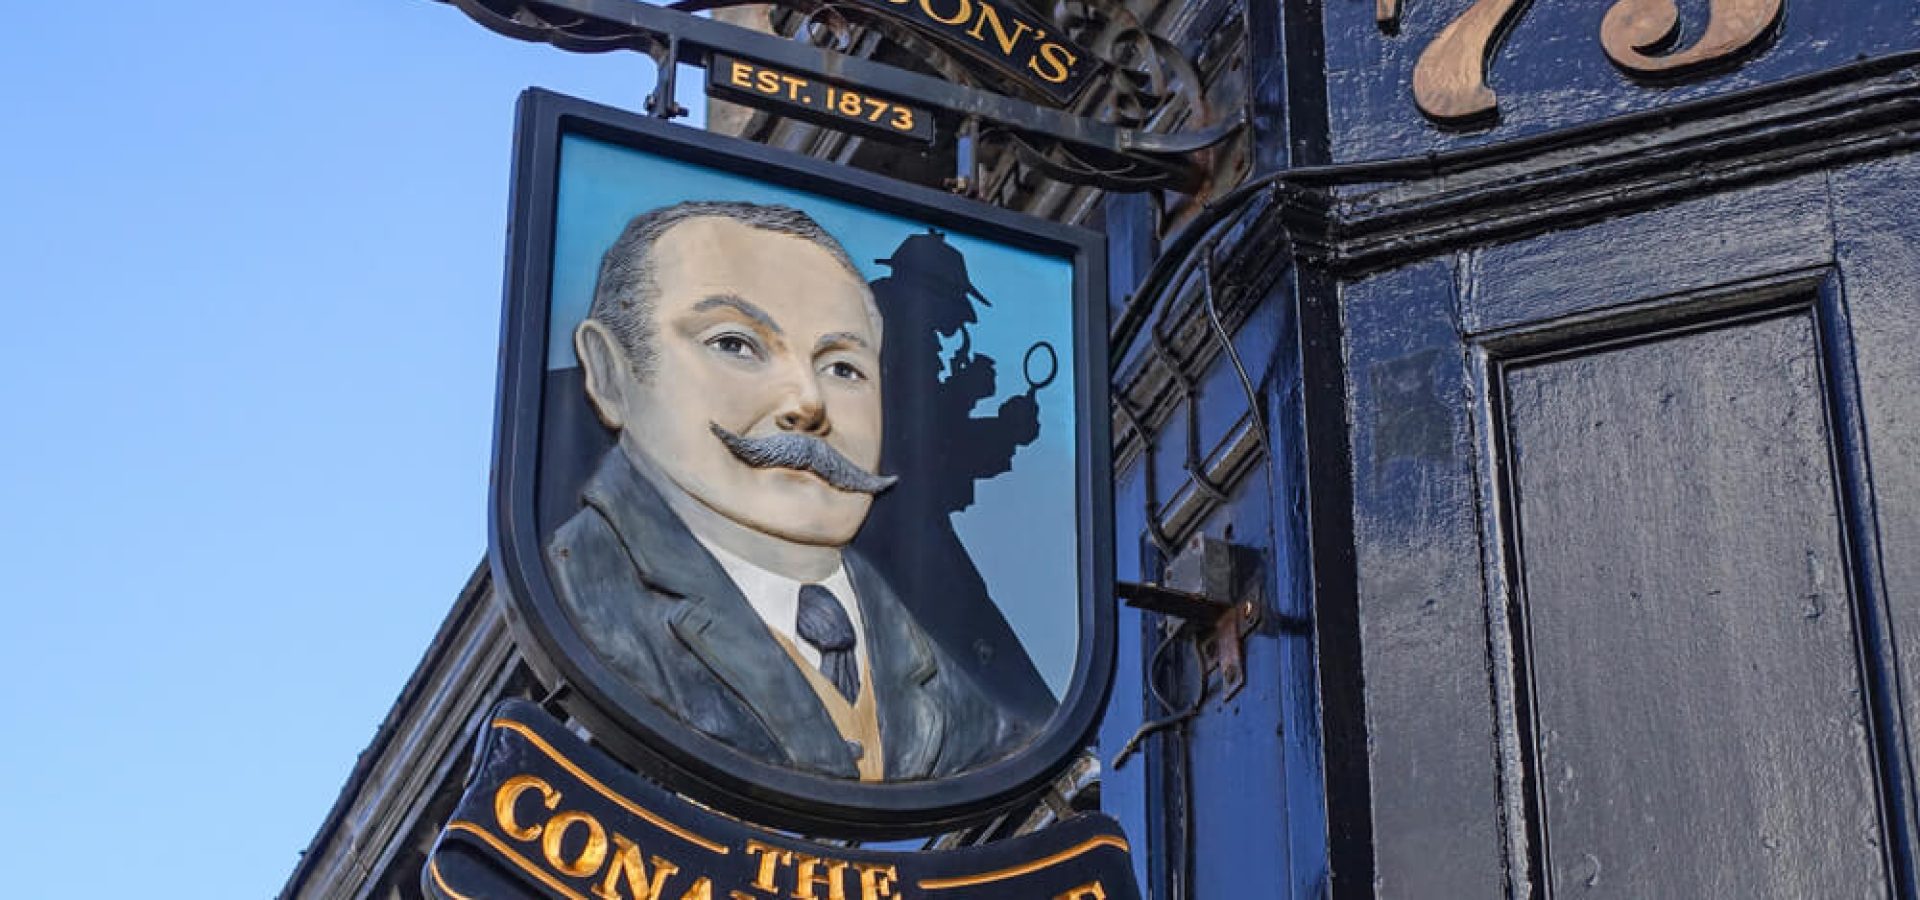 Sign of the well-known Conan Doyle Pub